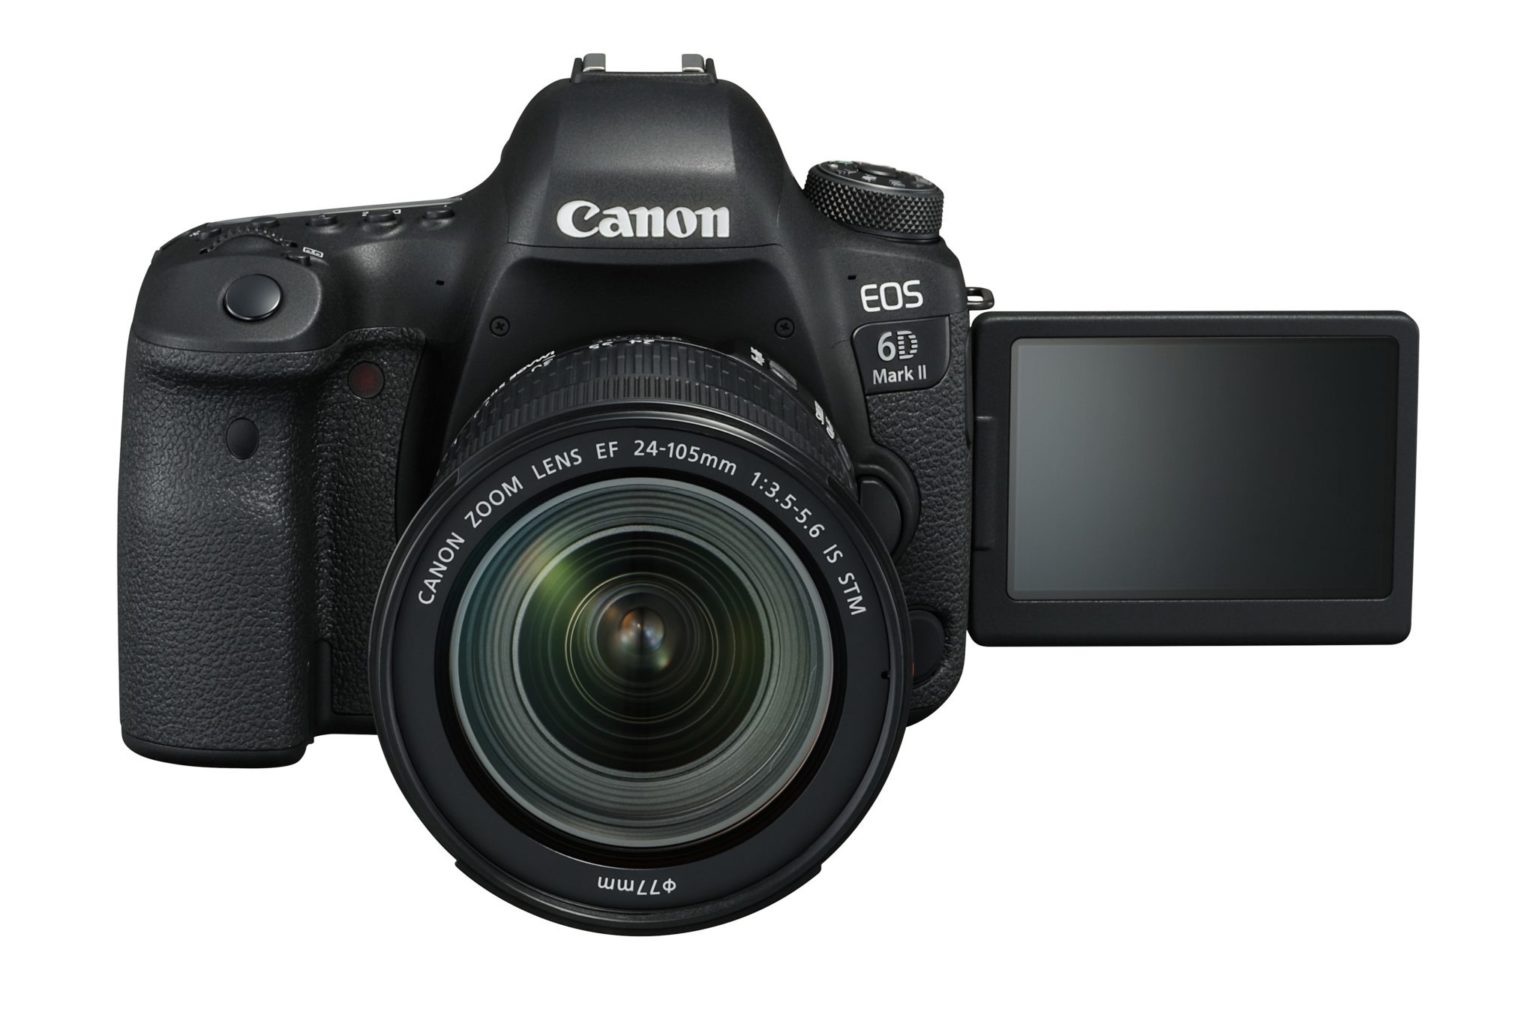 On test: Canon EOS 6D MkII